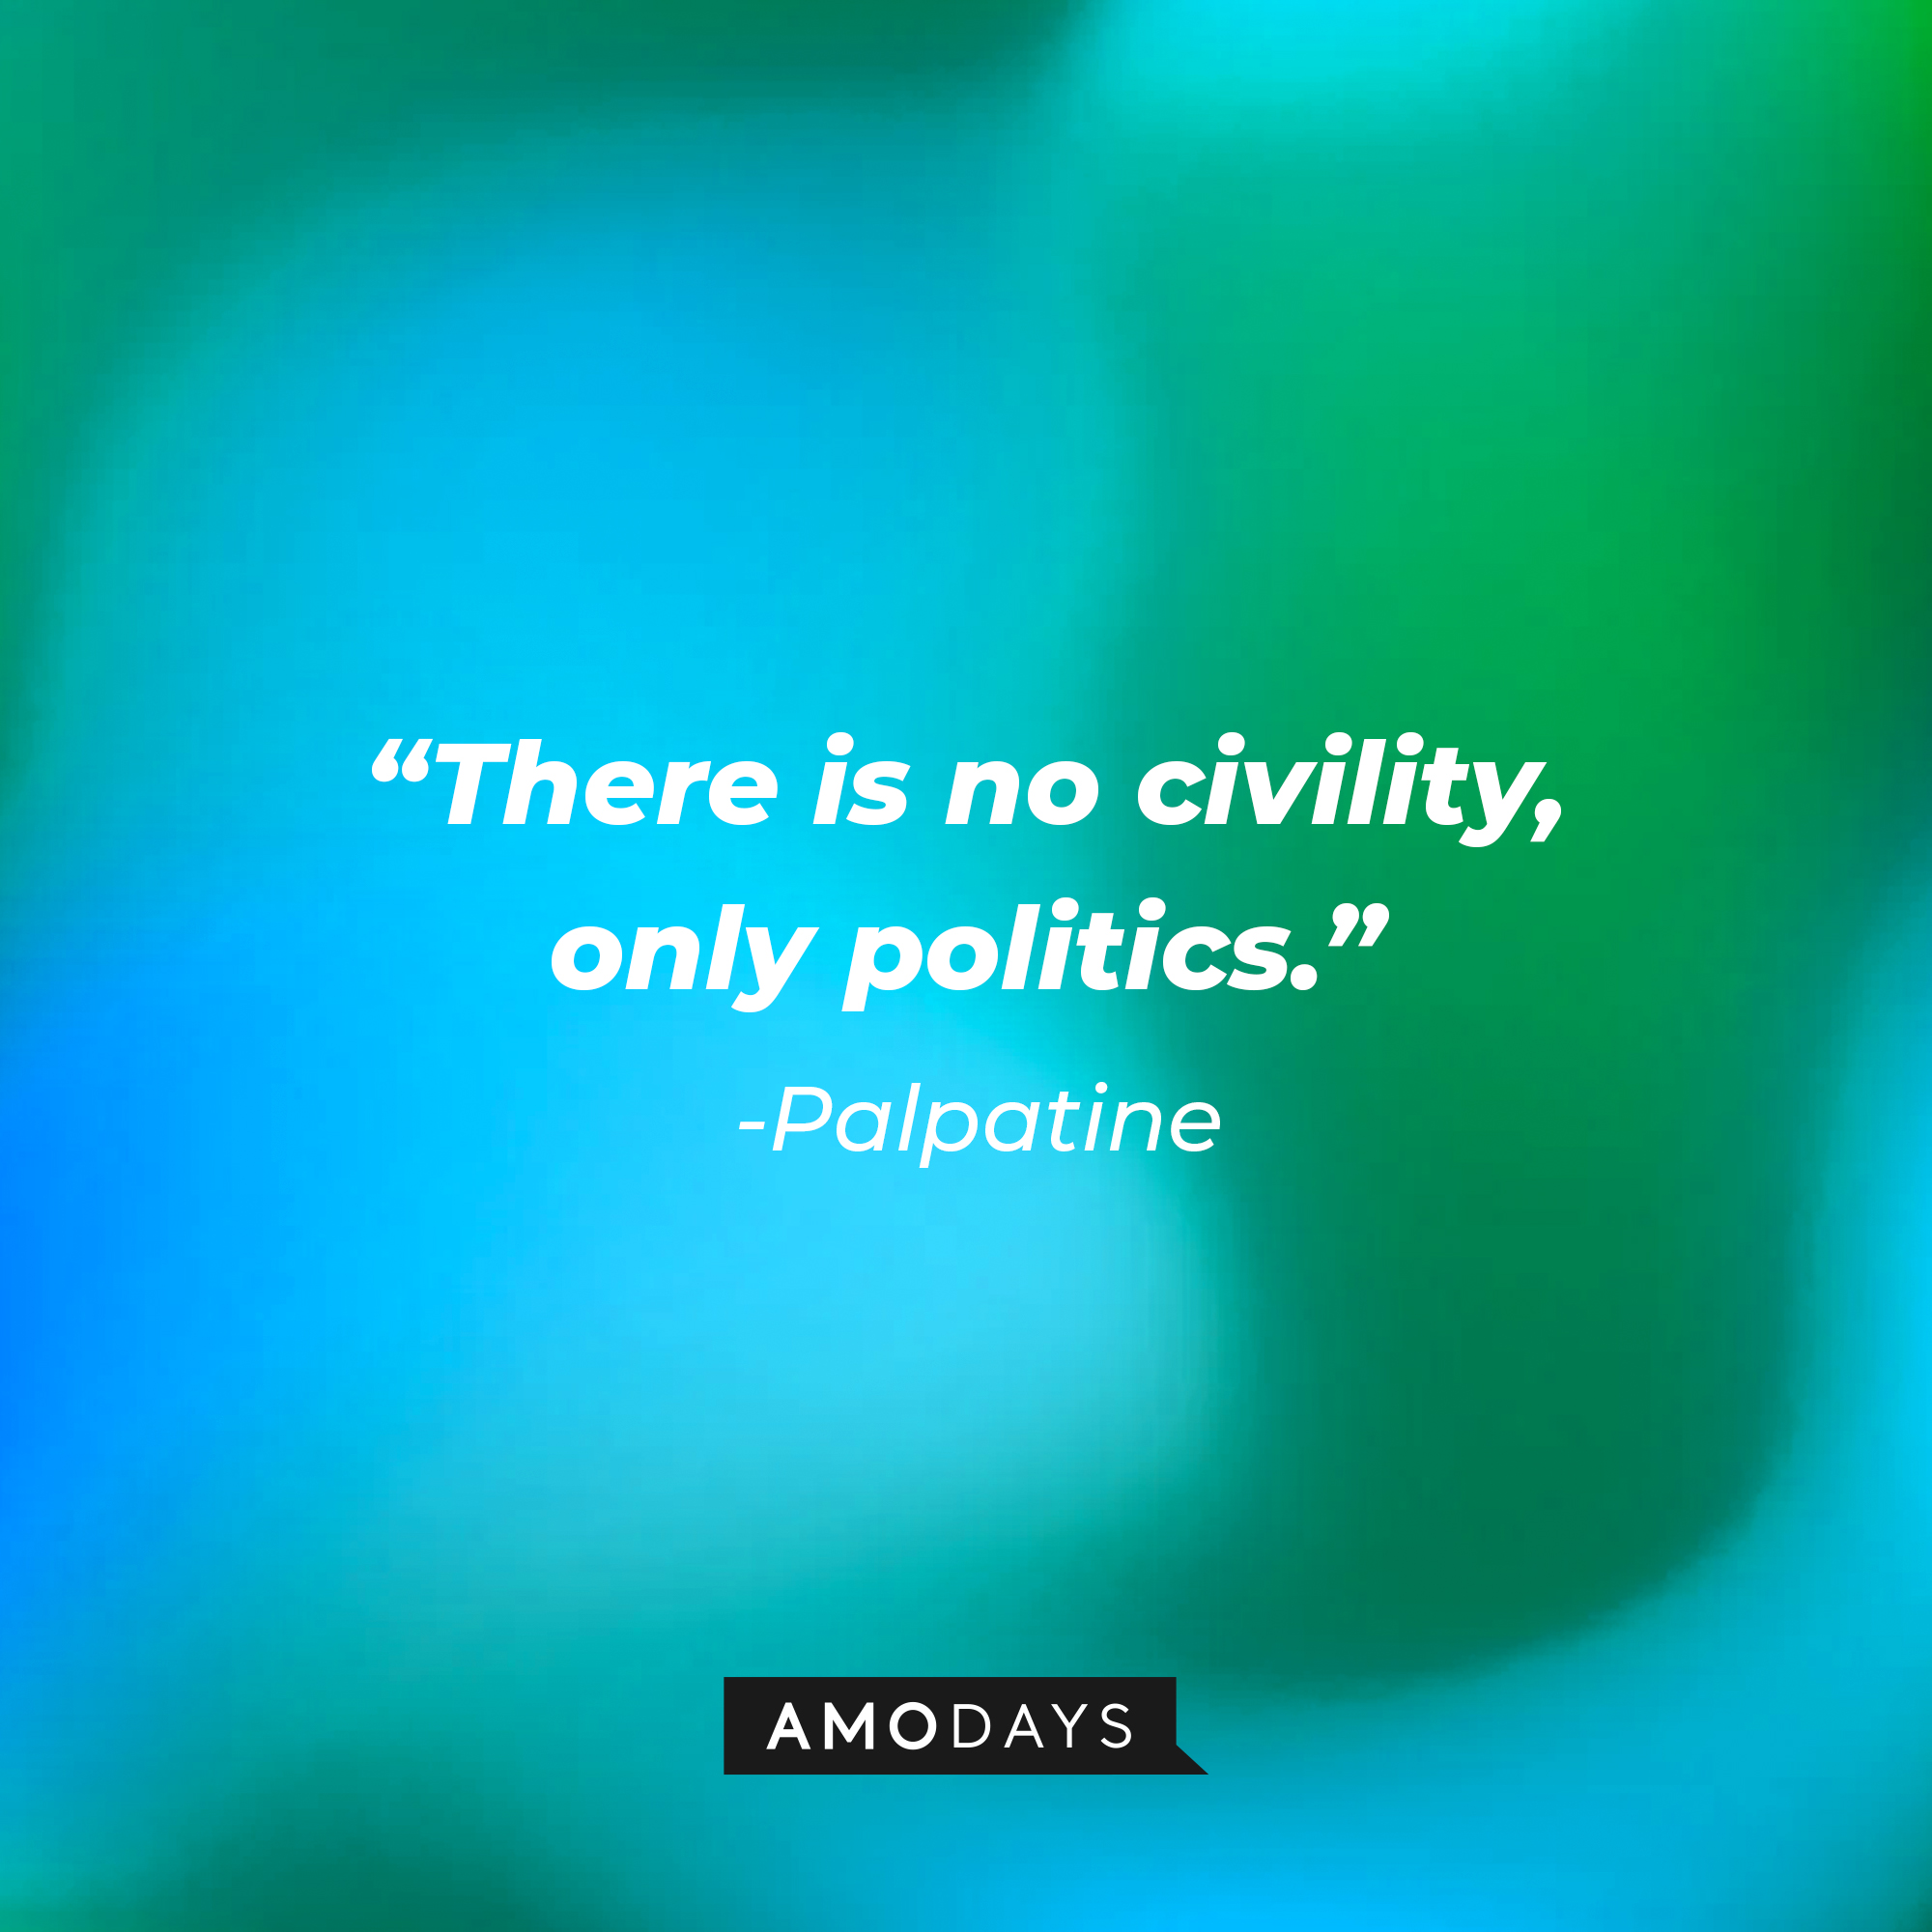 Palpatine’s quote: “There is no civility, only politics.” | Source: AmoDays